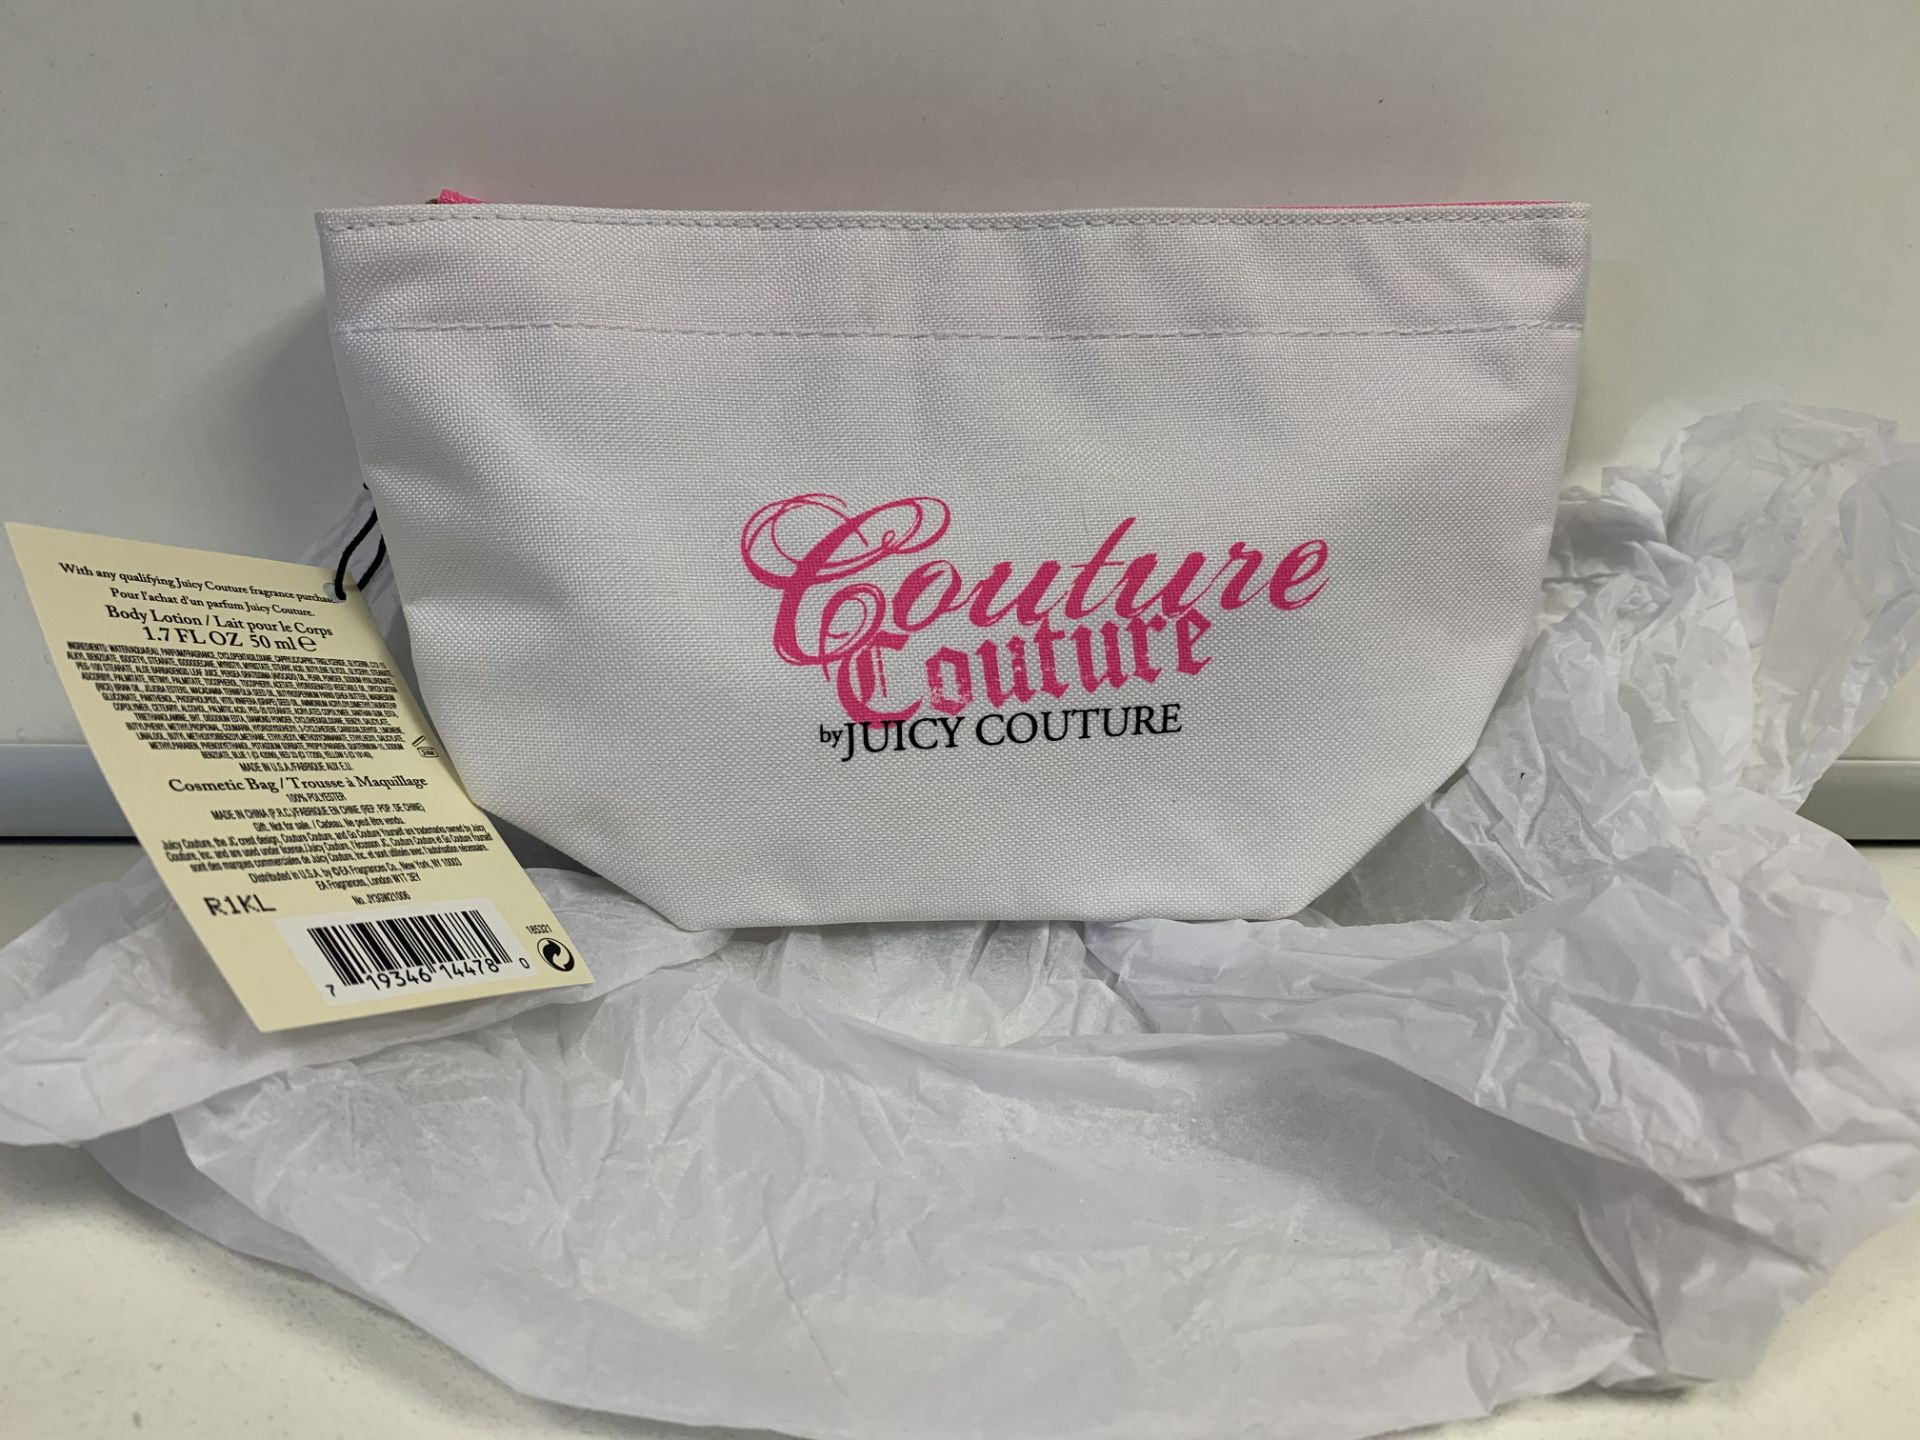 8 X BRAND NEW JUICY COUTURE COSMETIC BAG WITH 50ML BODY LOTION